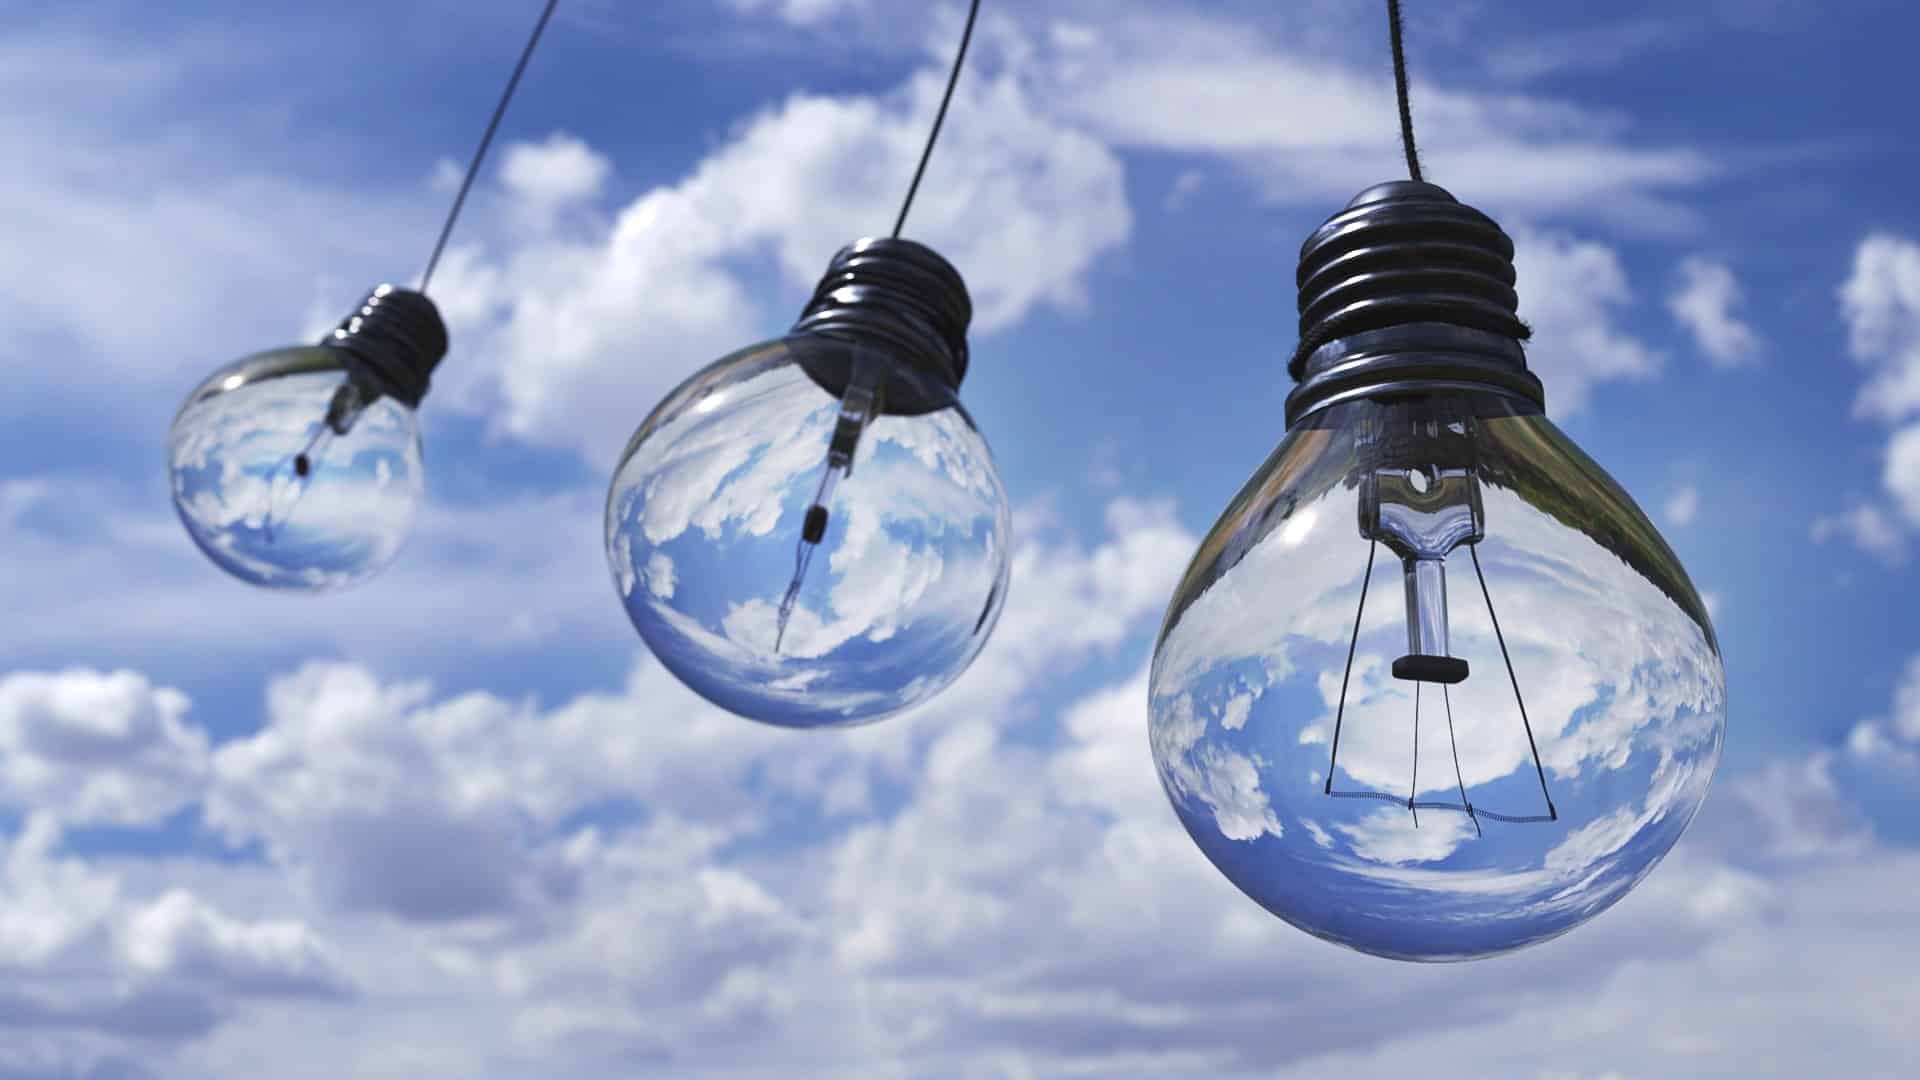 lightbulbs in the clouds - backup cloud data